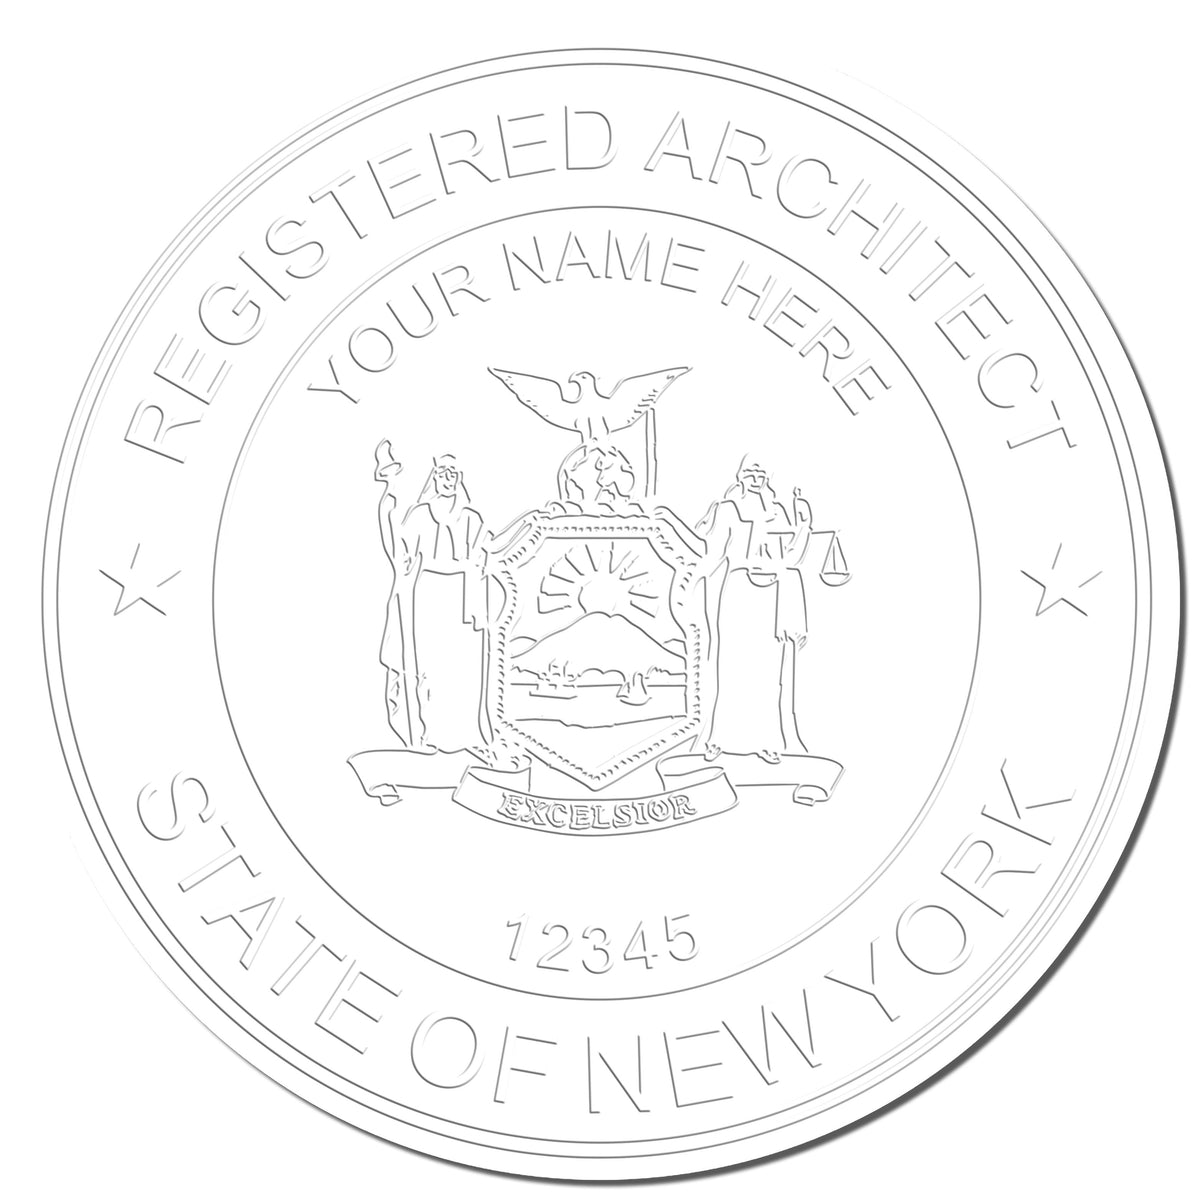 This paper is stamped with a sample imprint of the Gift New York Architect Seal, signifying its quality and reliability.